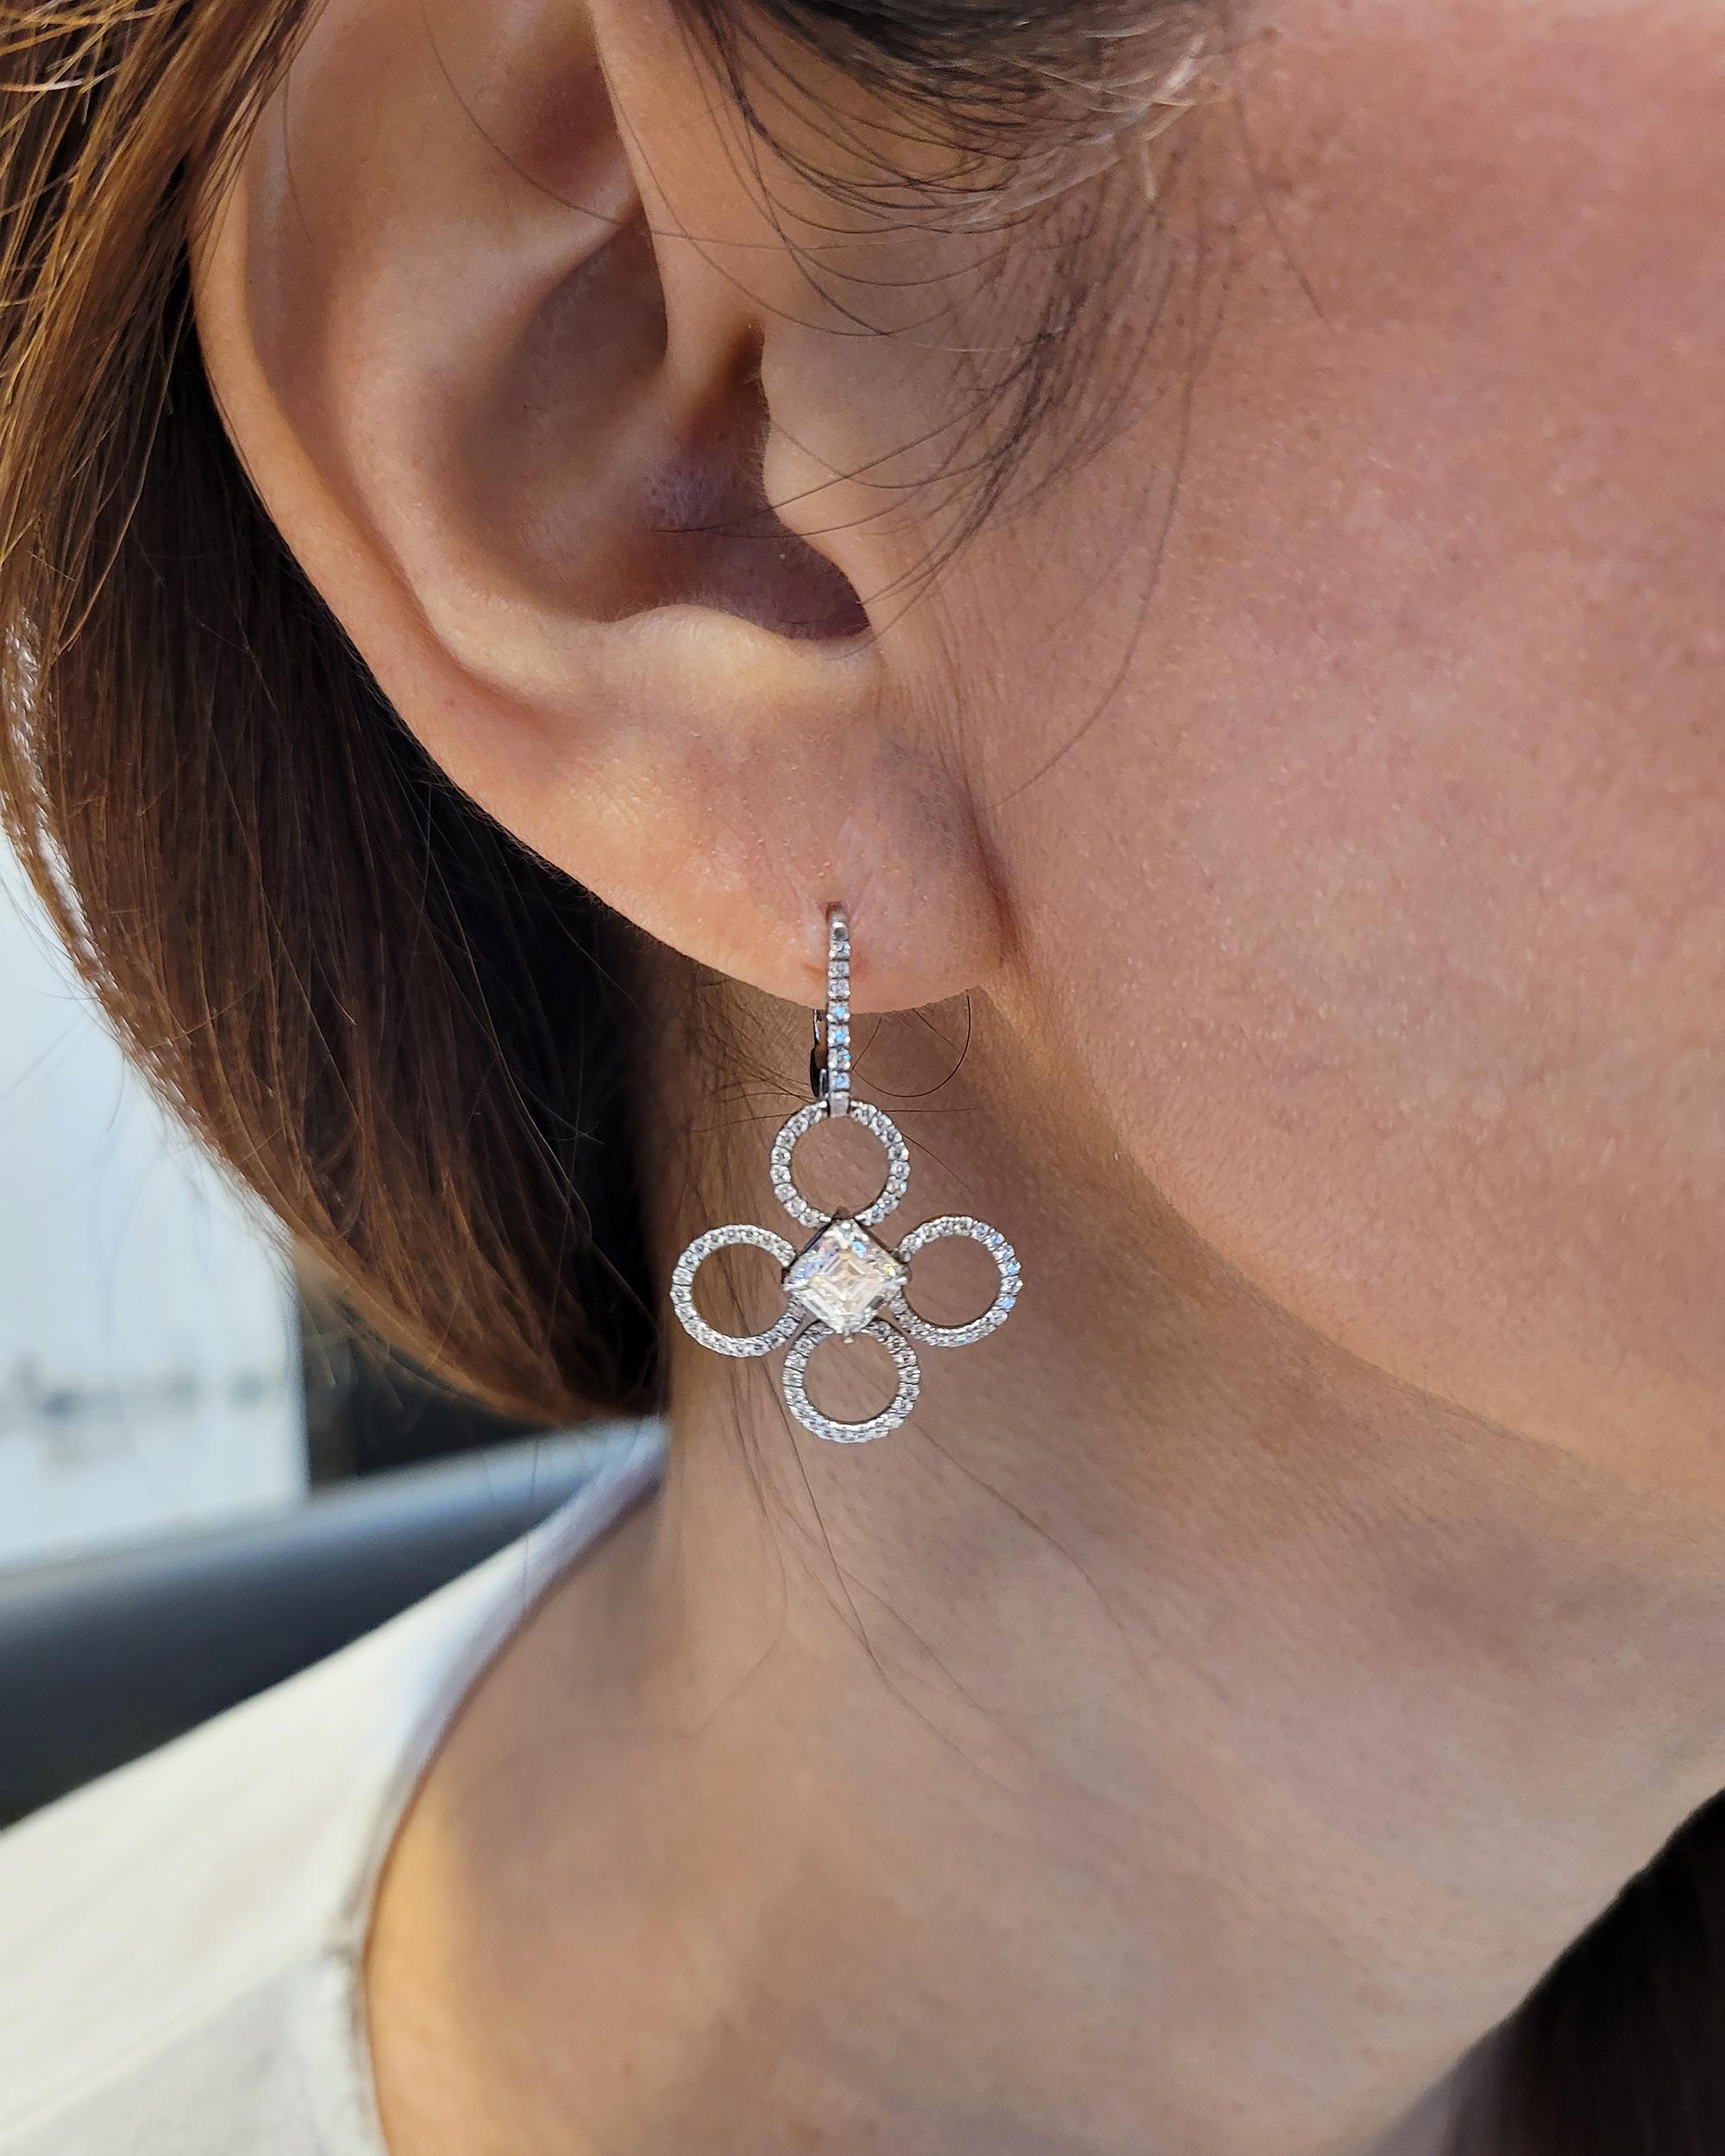 Introducing the Clover Flower Diamond Platinum Earrings by Daniel K, a stunning jewelry masterpiece that captures the essence of blooming petals. Crafted from high-quality platinum, these earrings feature two Asscher-cut diamonds in the center